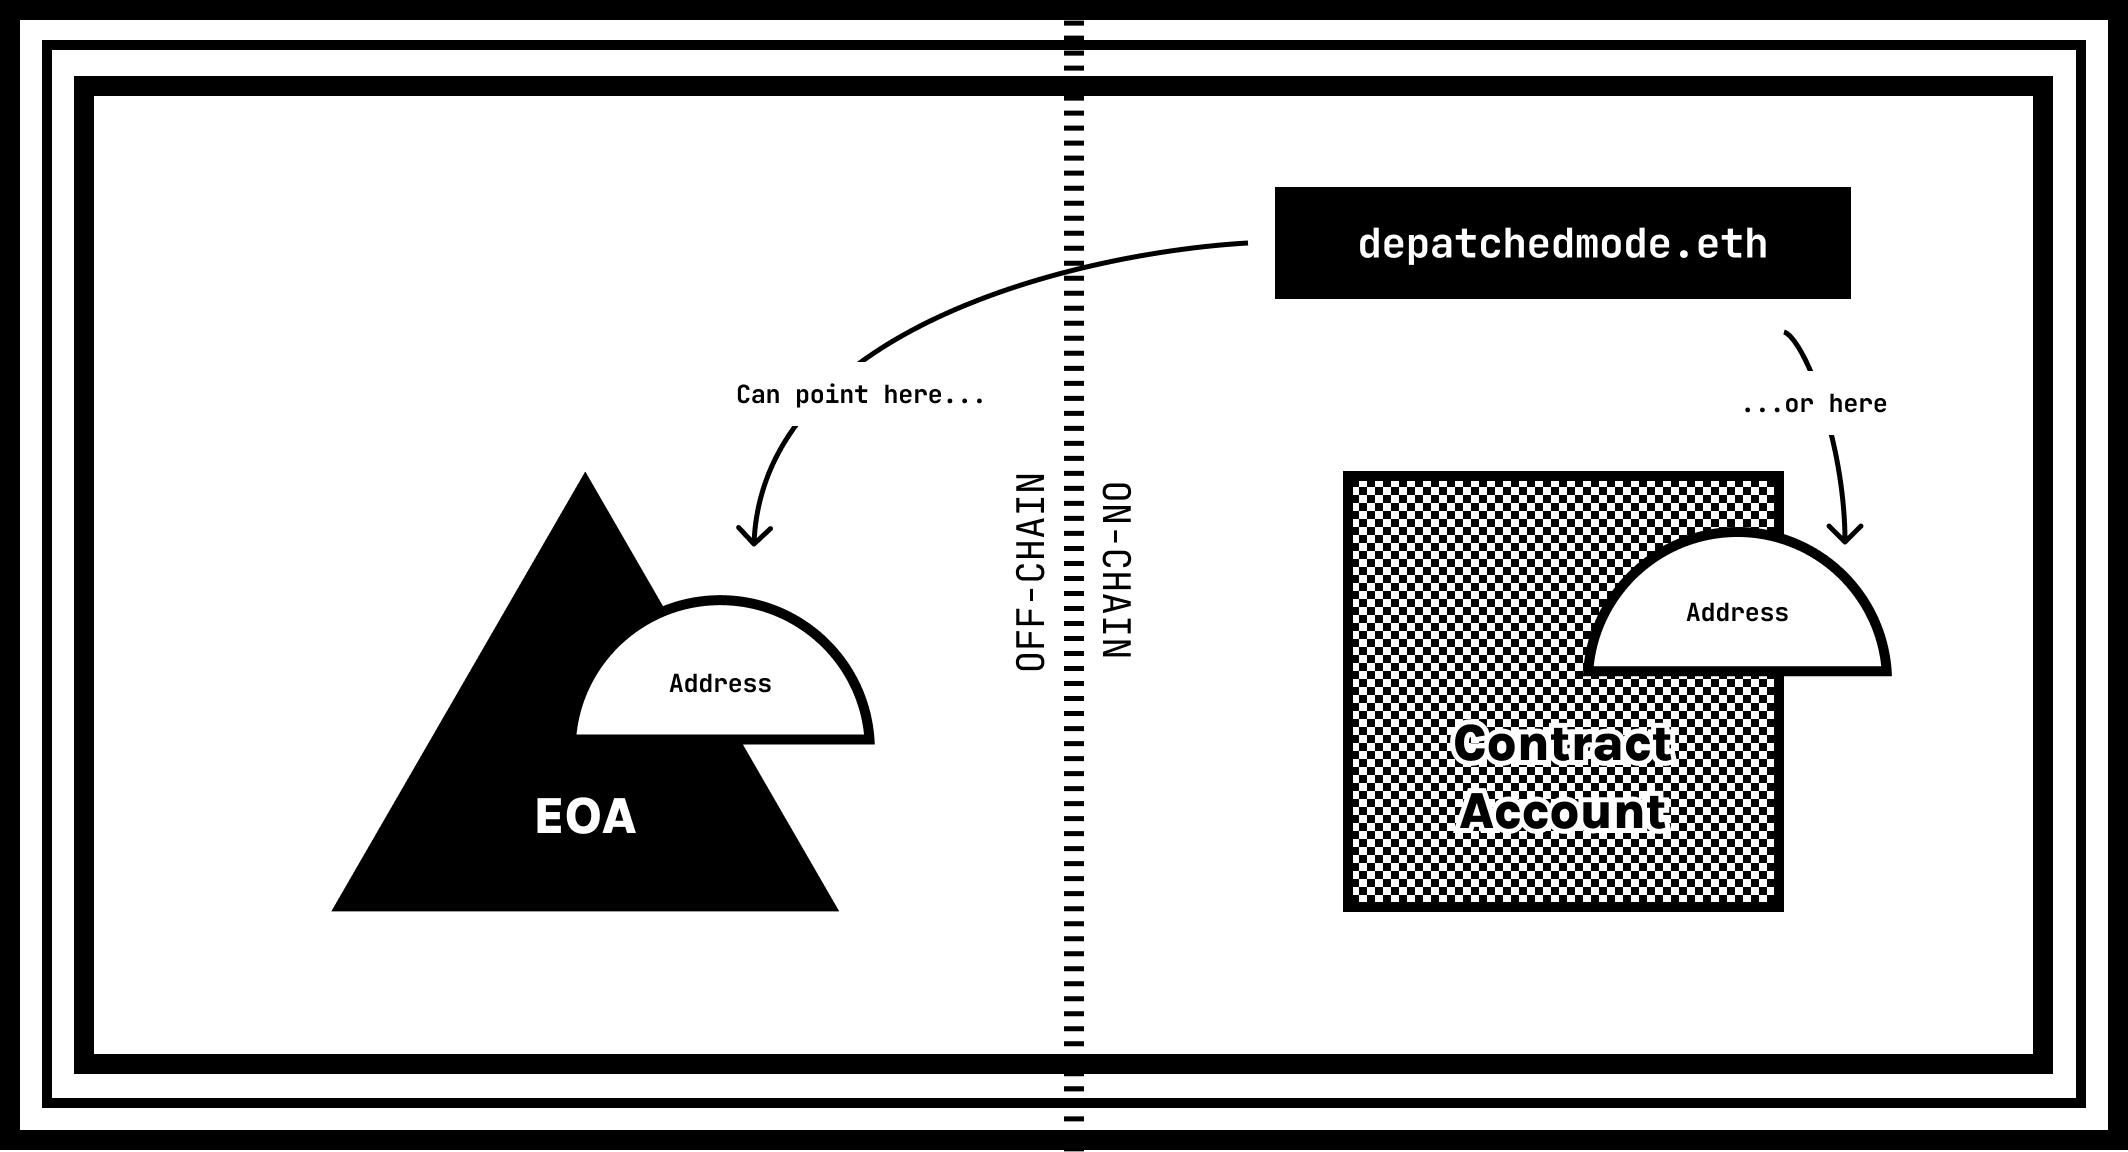 ENS domains can be pointed at an EOA or Contract Account.